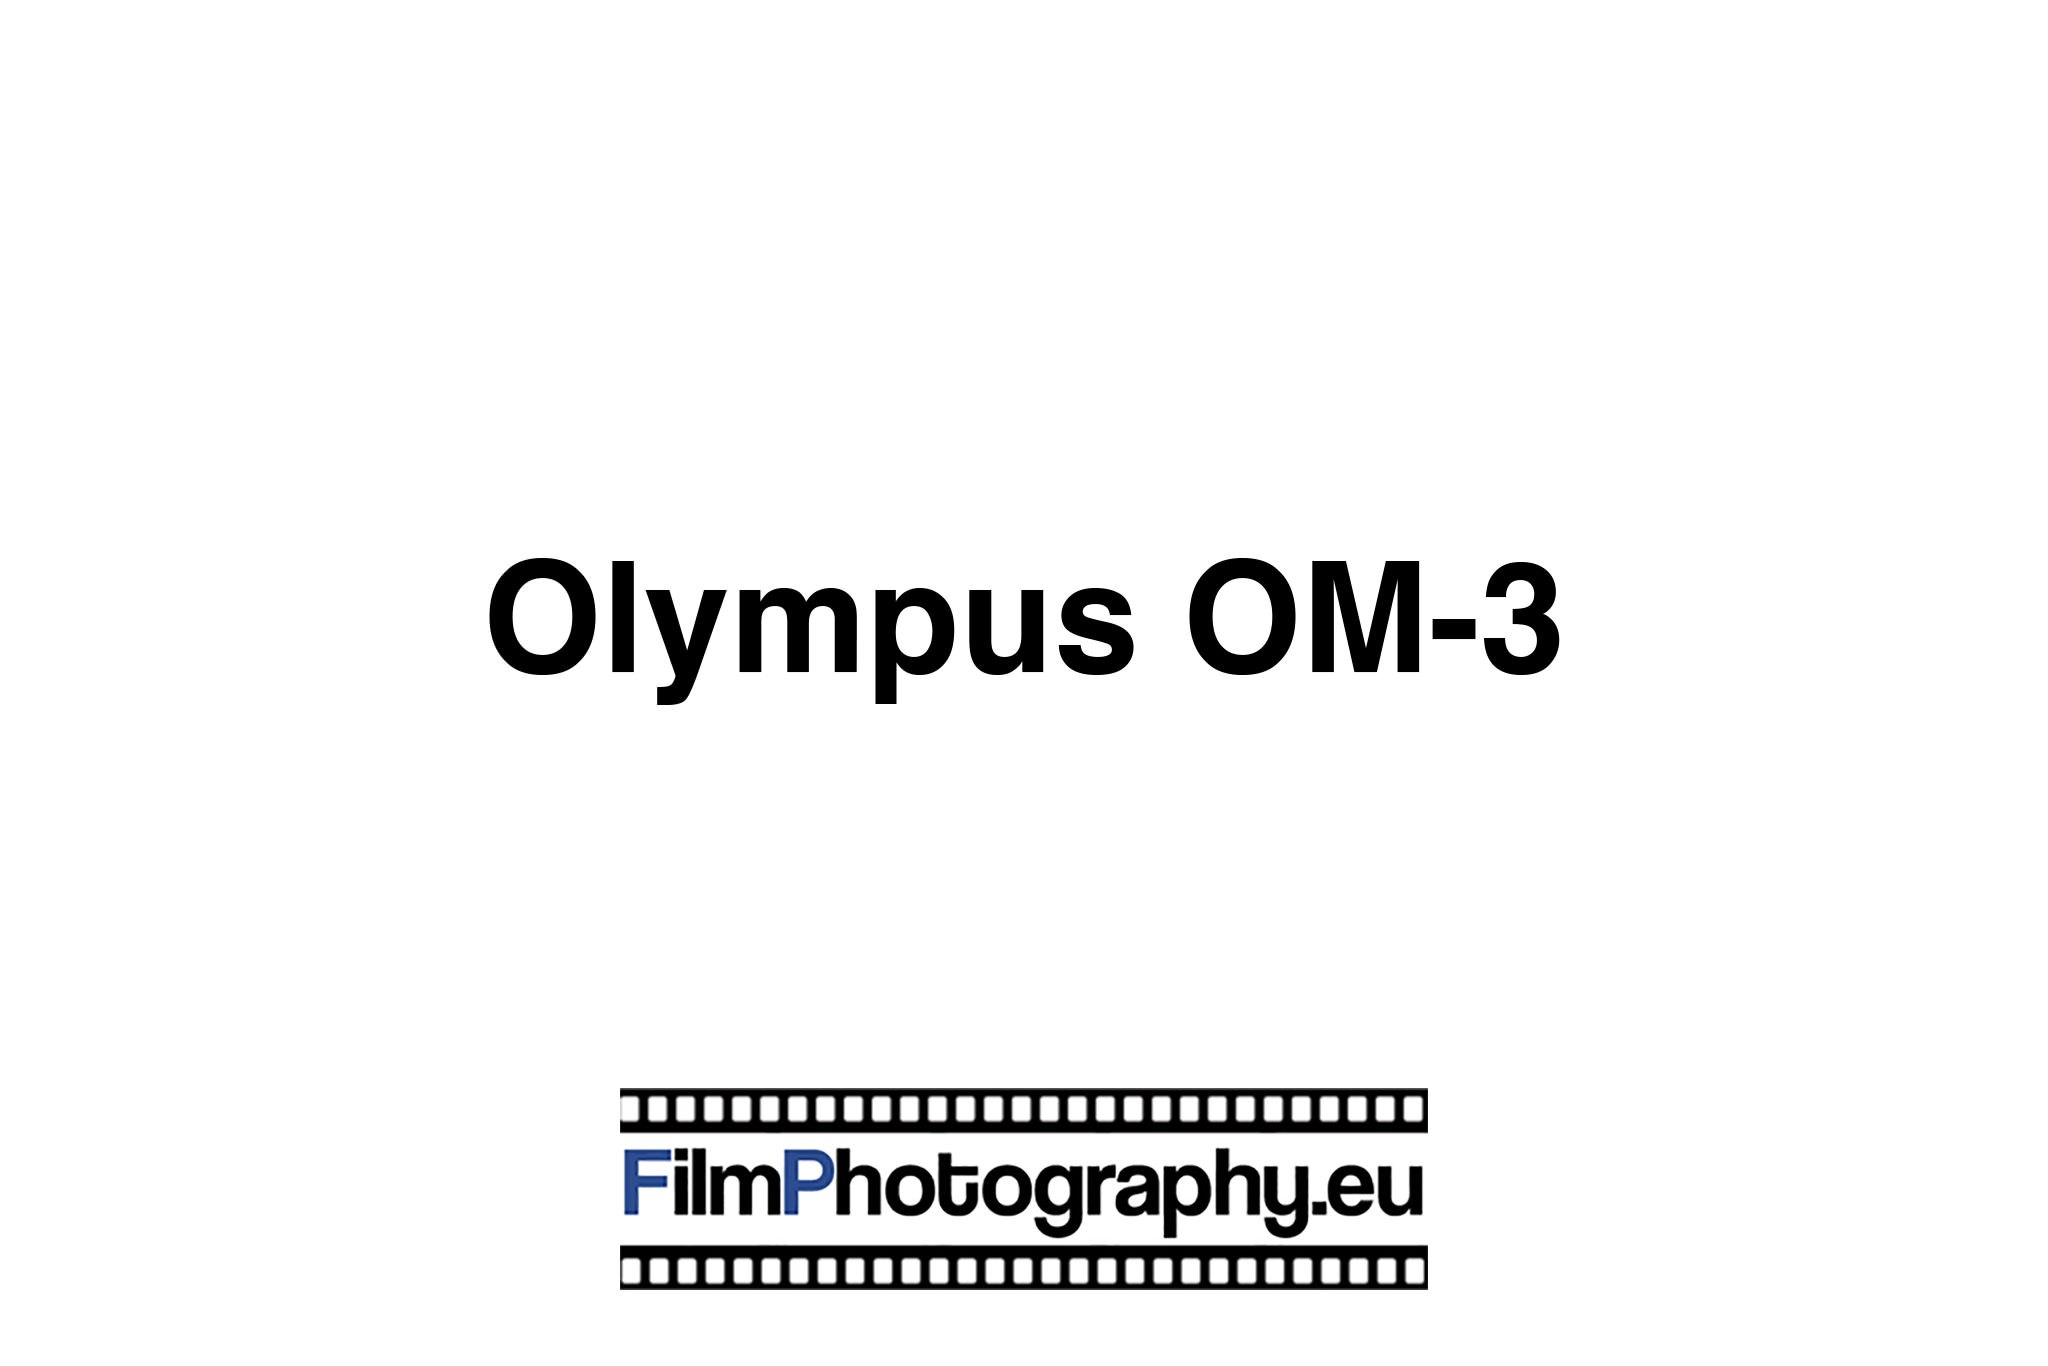 Olympus OM-3 Ti - Learn more about this 35mm SLR camera